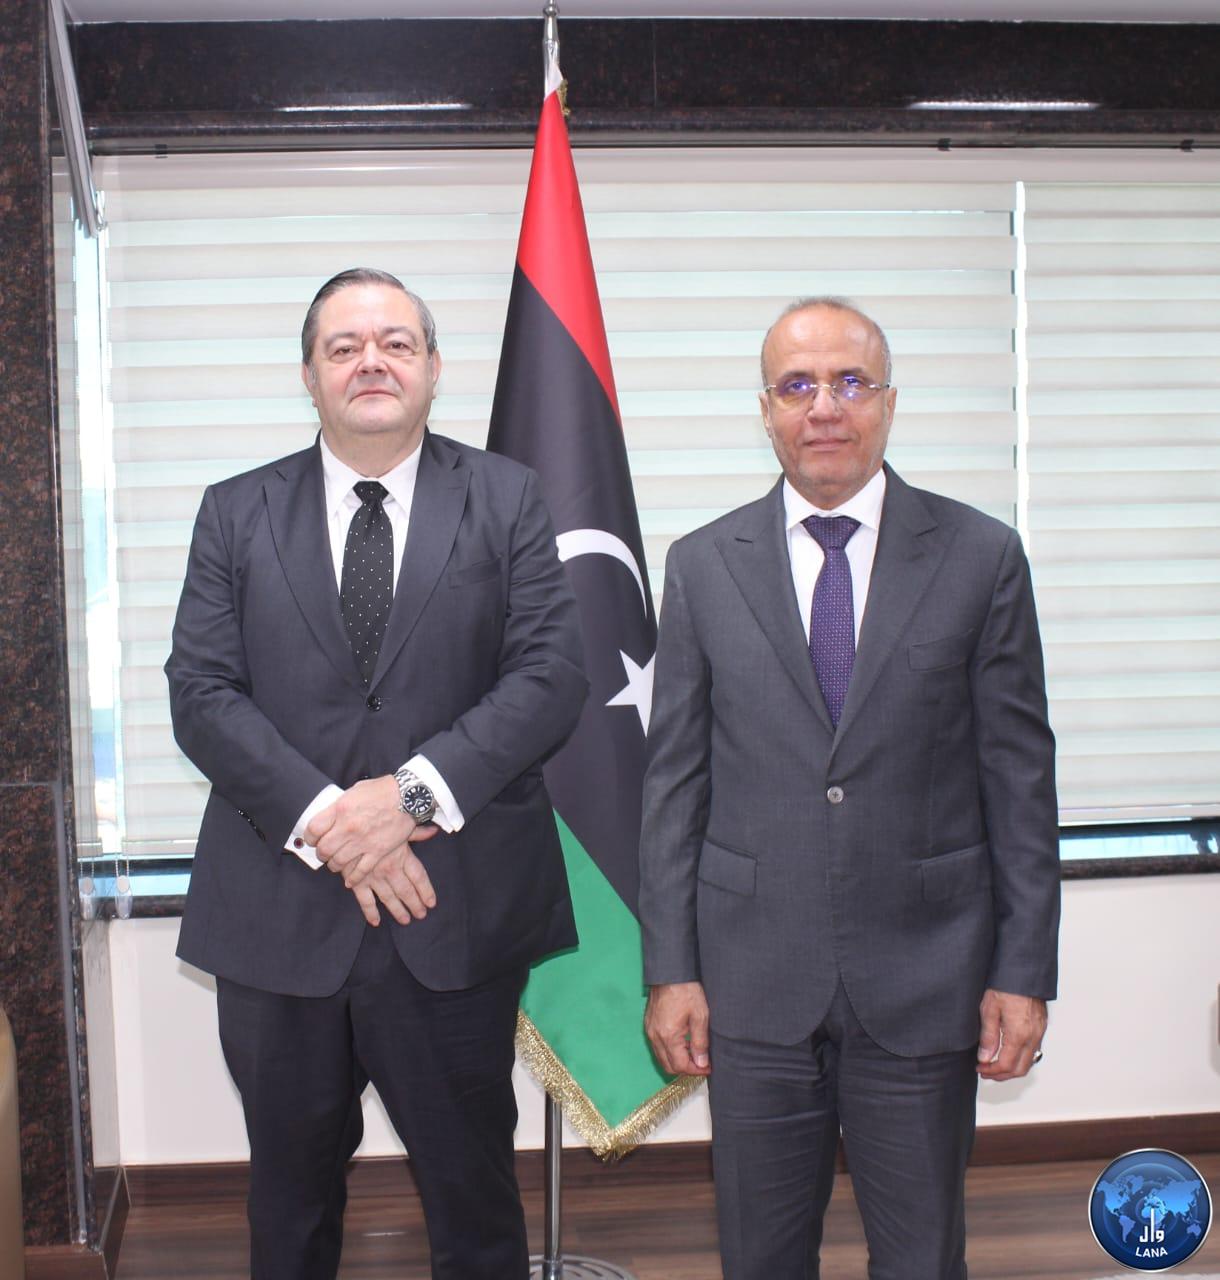 Al-Lafi receives the Spanish ambassador to Libya, and thanks him for the role of the Spanish rescue team since the Derna disaster.